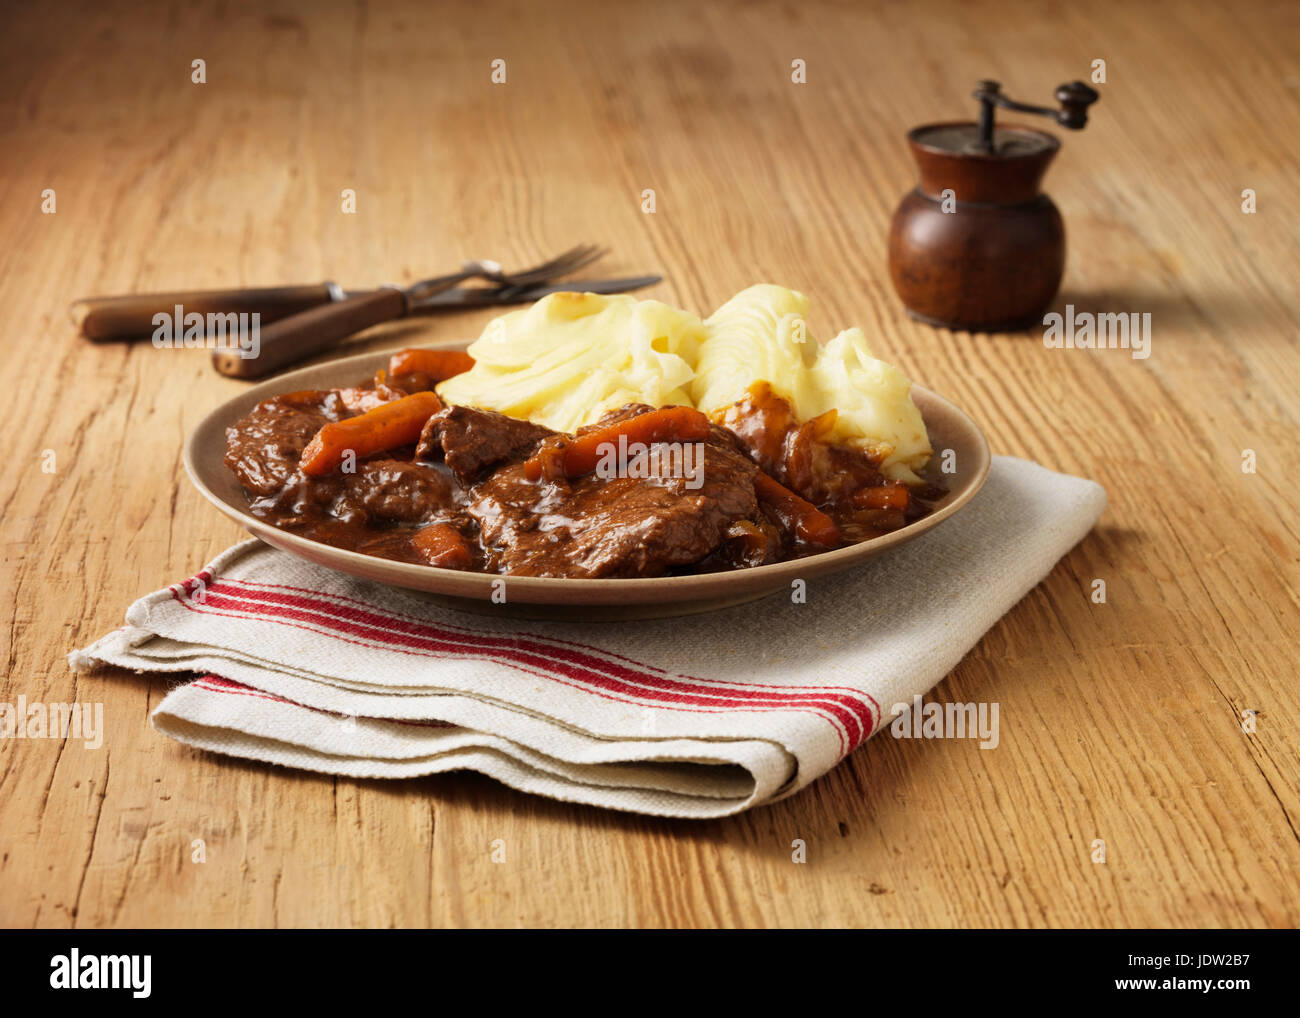 Plate of braised beef with potatoes Stock Photo